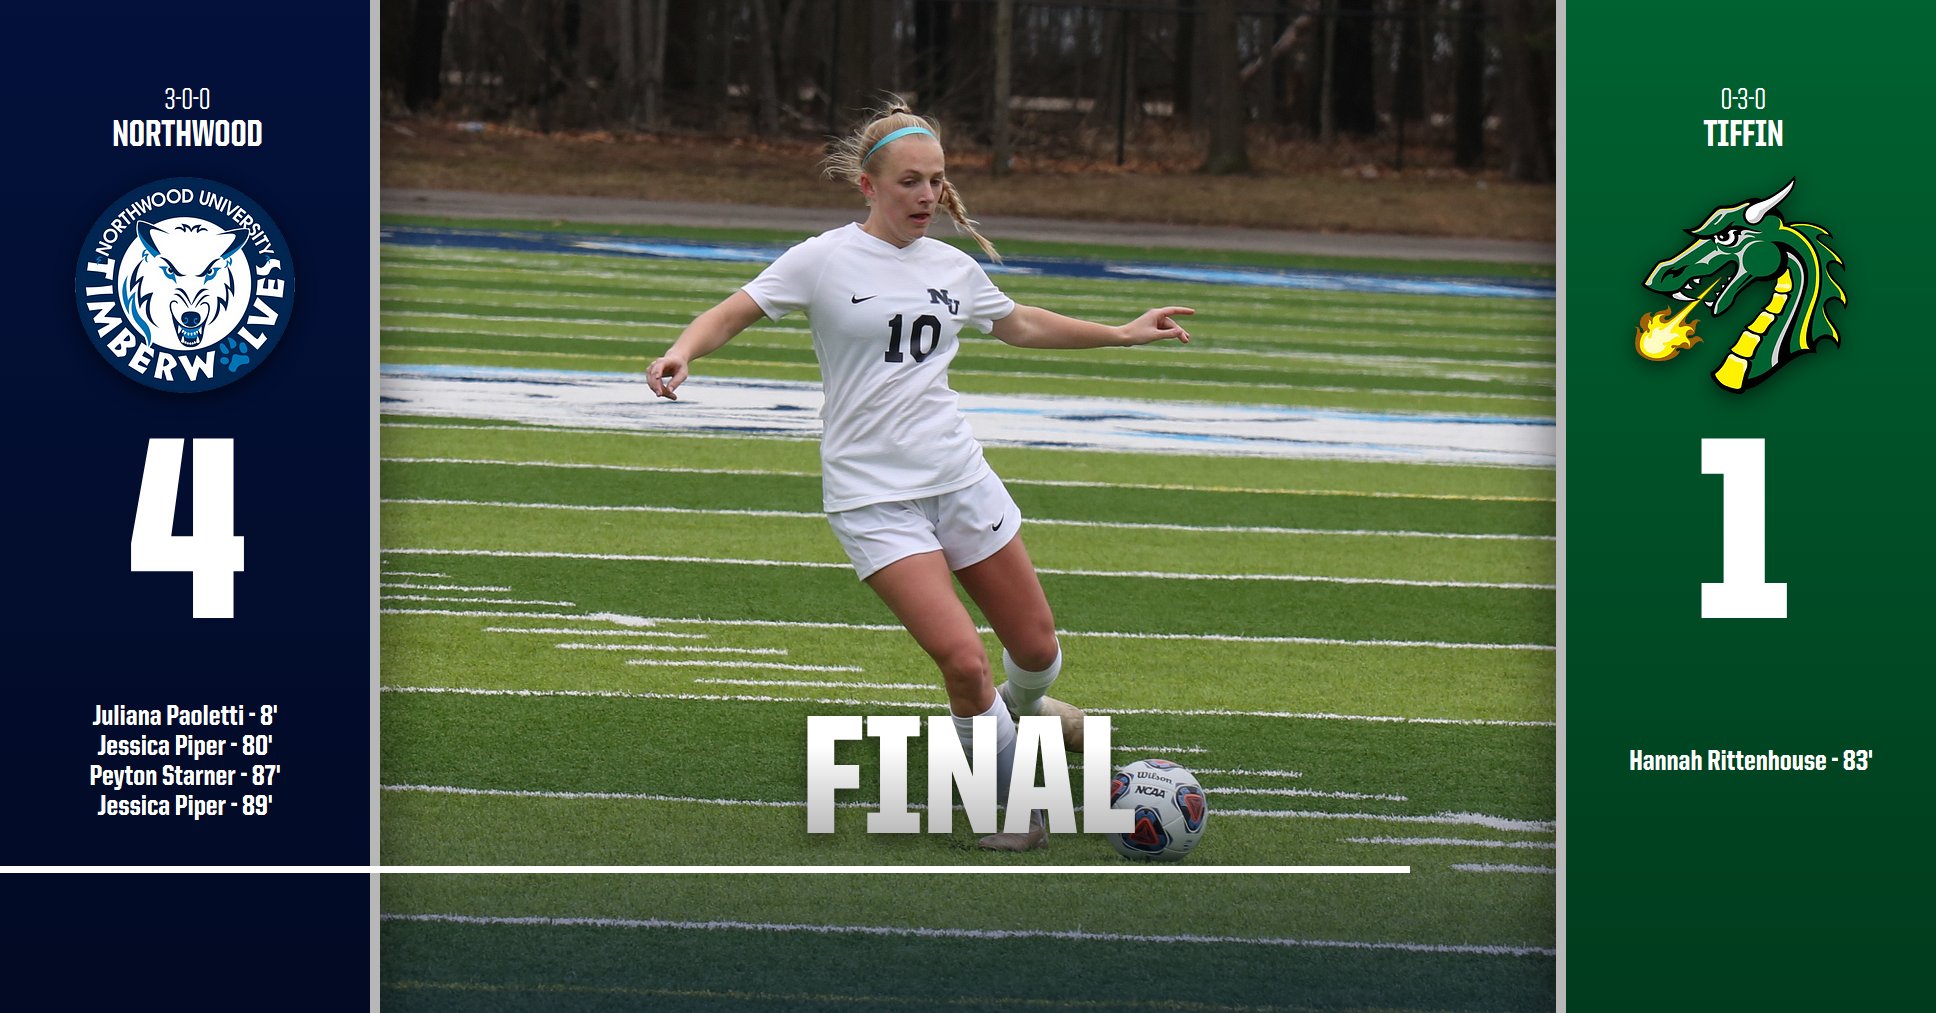 Women's Soccer Improves To 3-0 With 4-1 Win At Tiffin